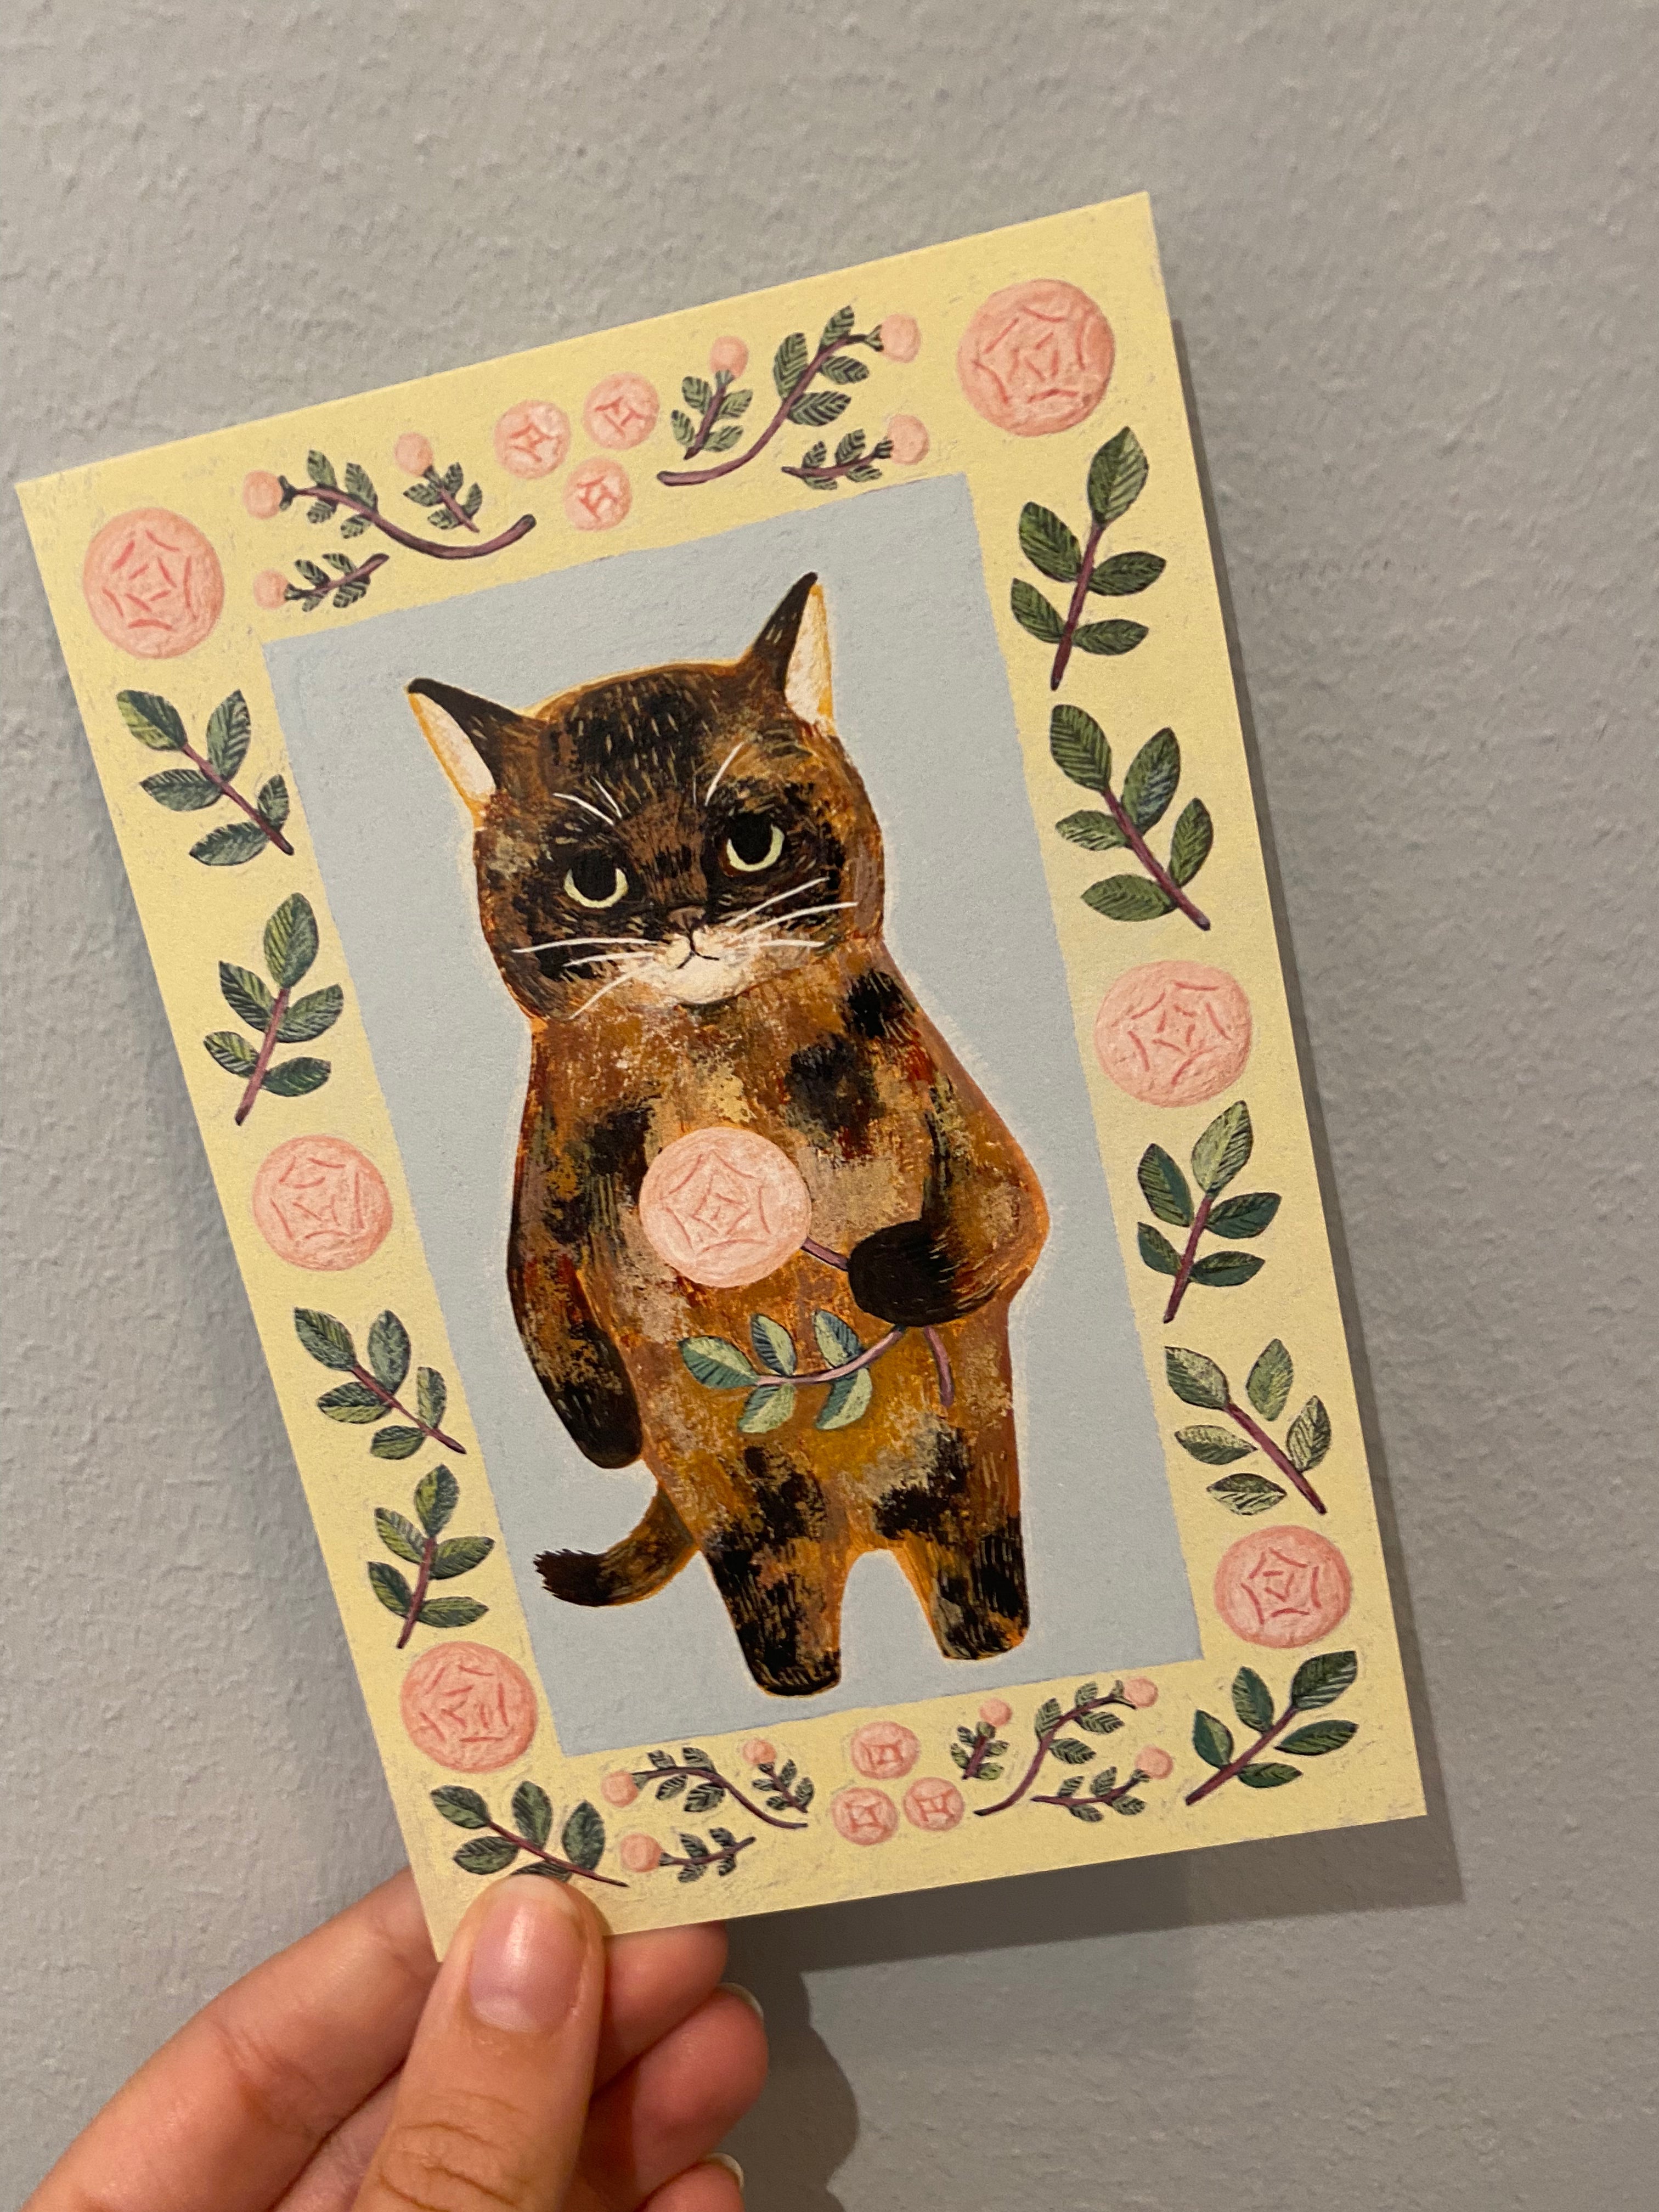 Yellow card with cat holding a rose